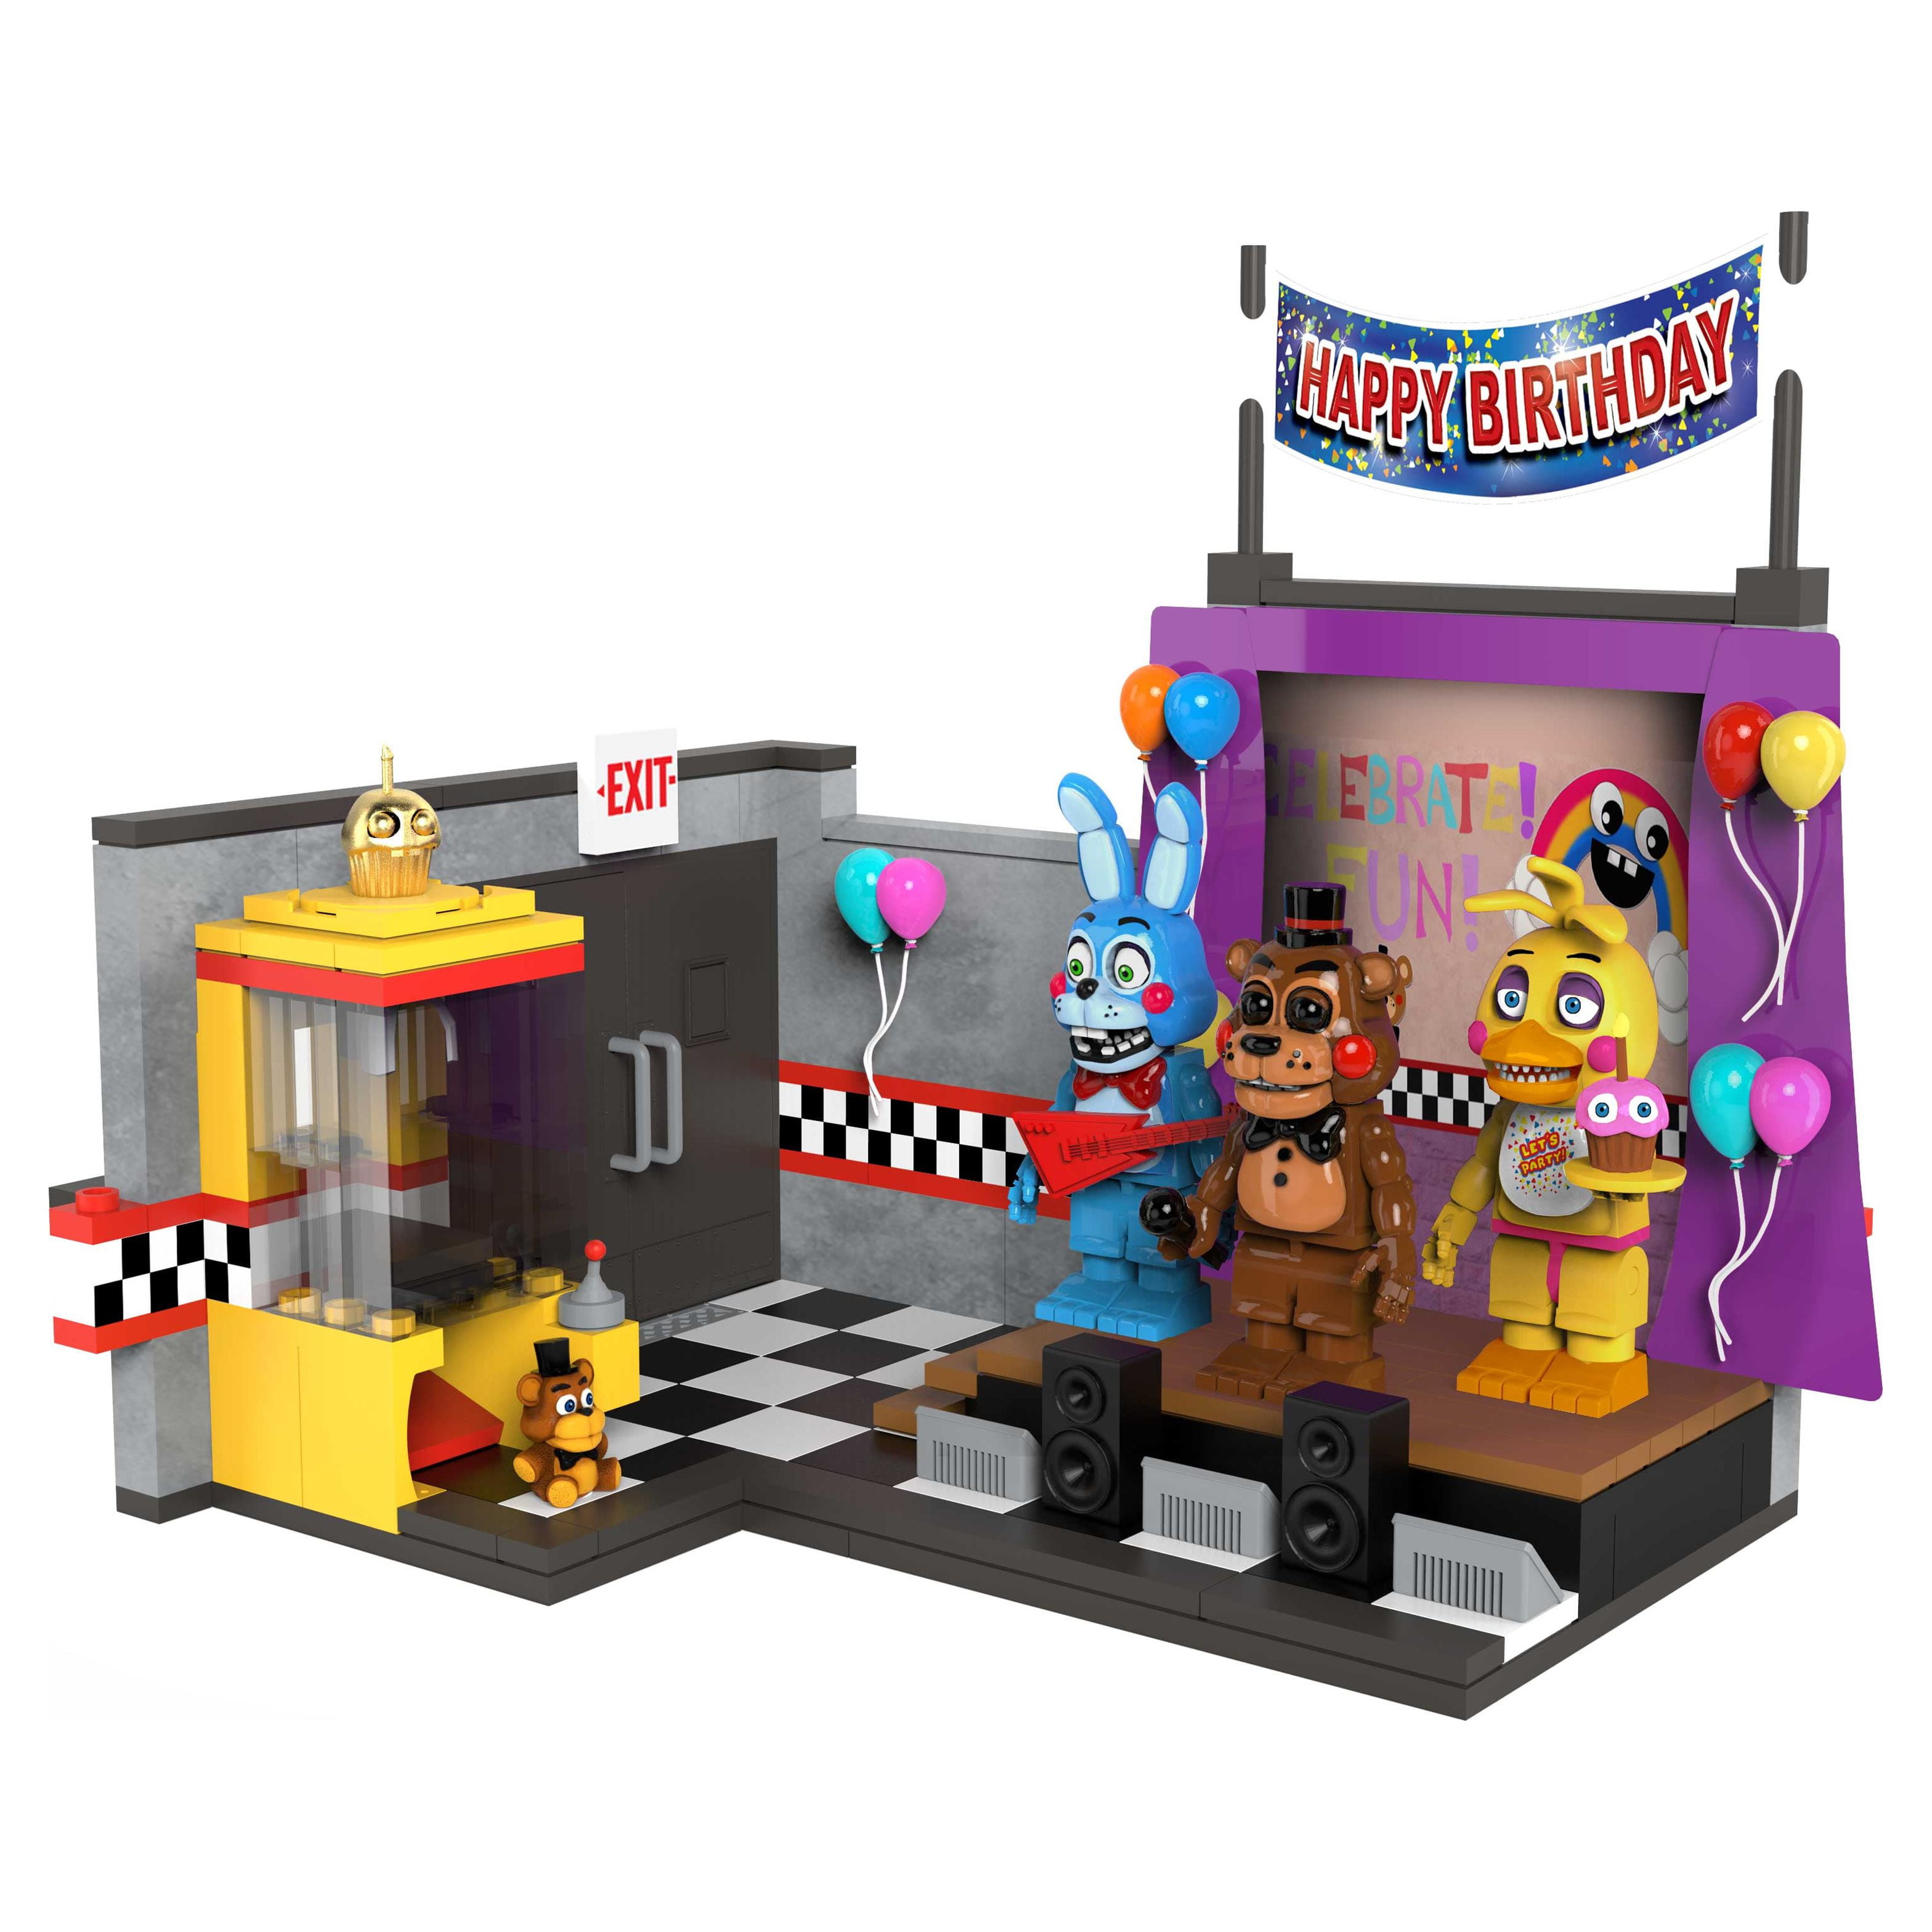 Five nights at Freddy's 2 - online puzzle